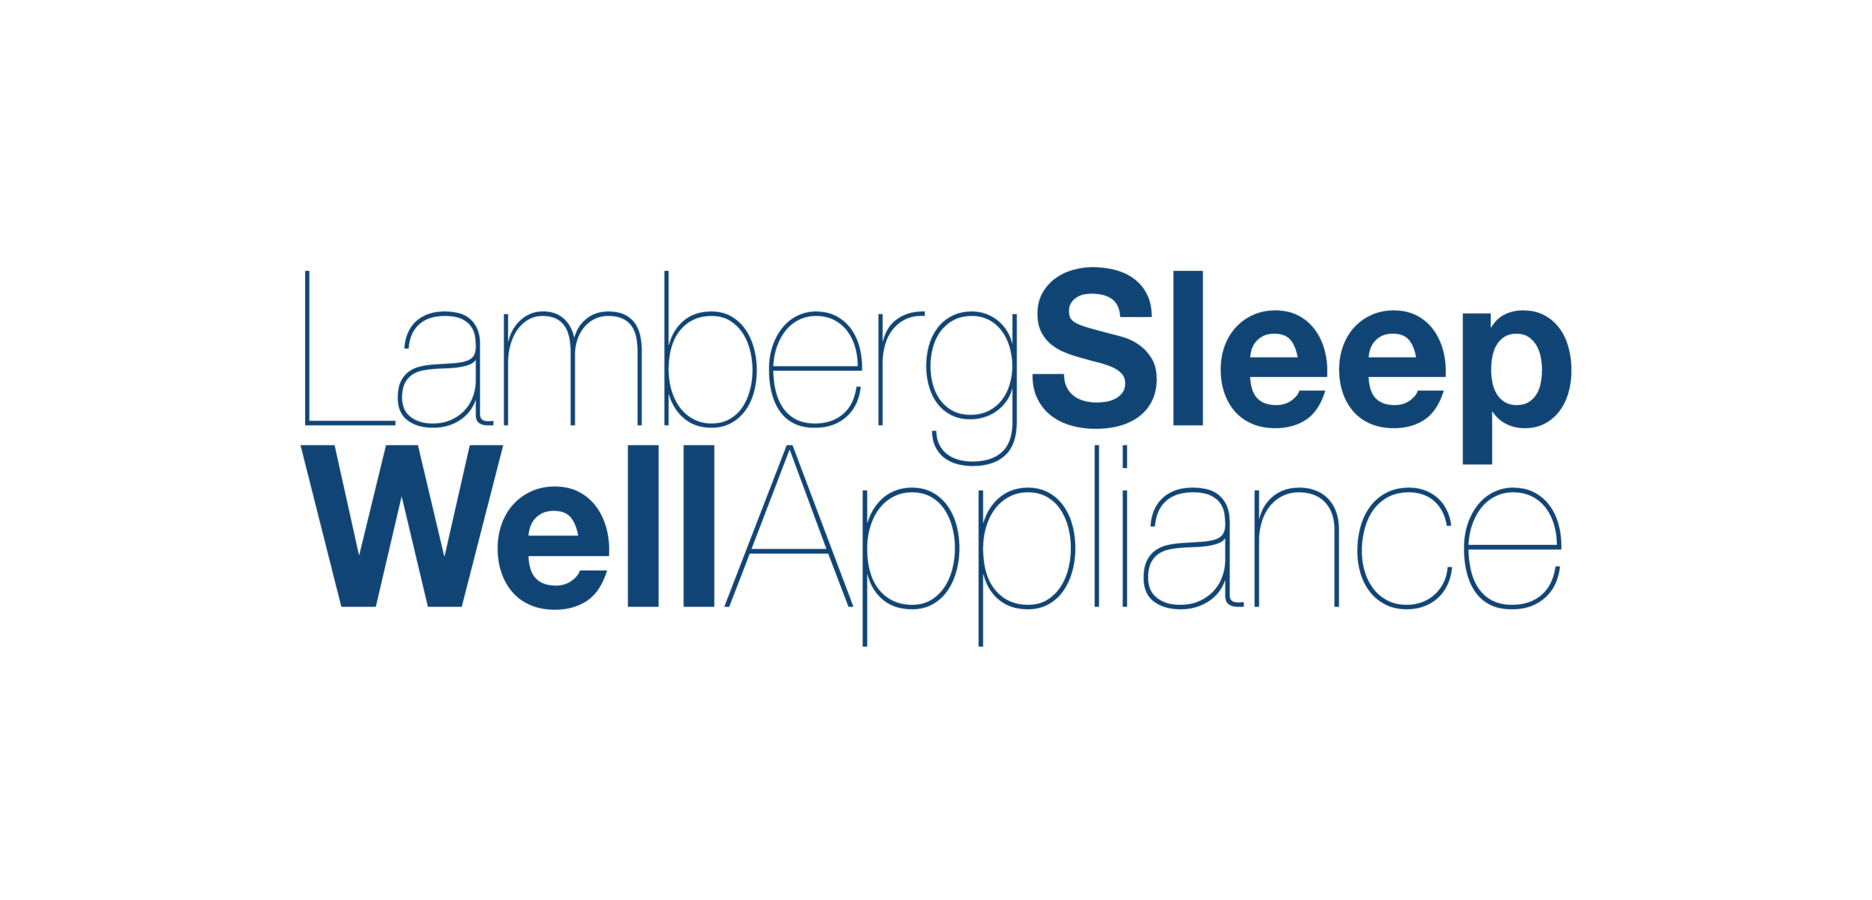 Frequently Asked Questions (FAQs): Lamberg SleepWell Oral Appliance